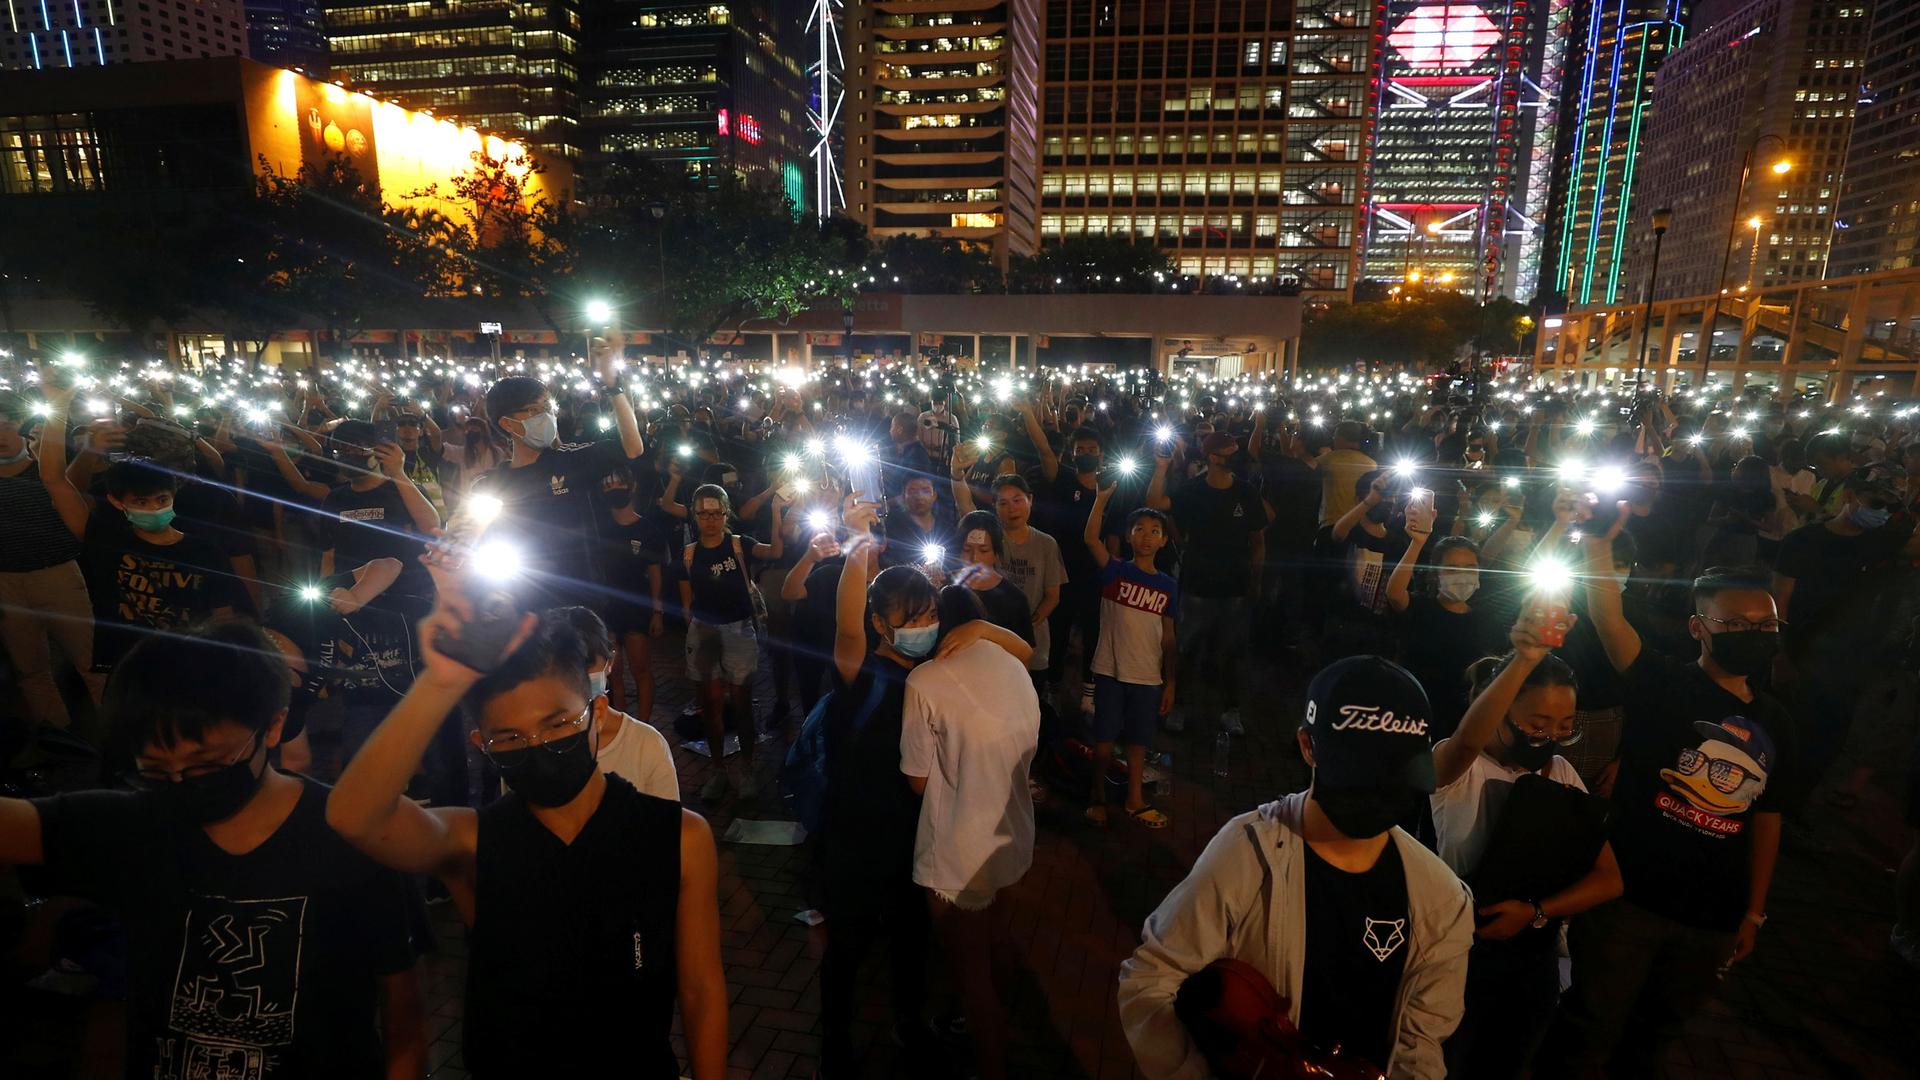 Crowds gather at night in a plaza in Hong Kong.